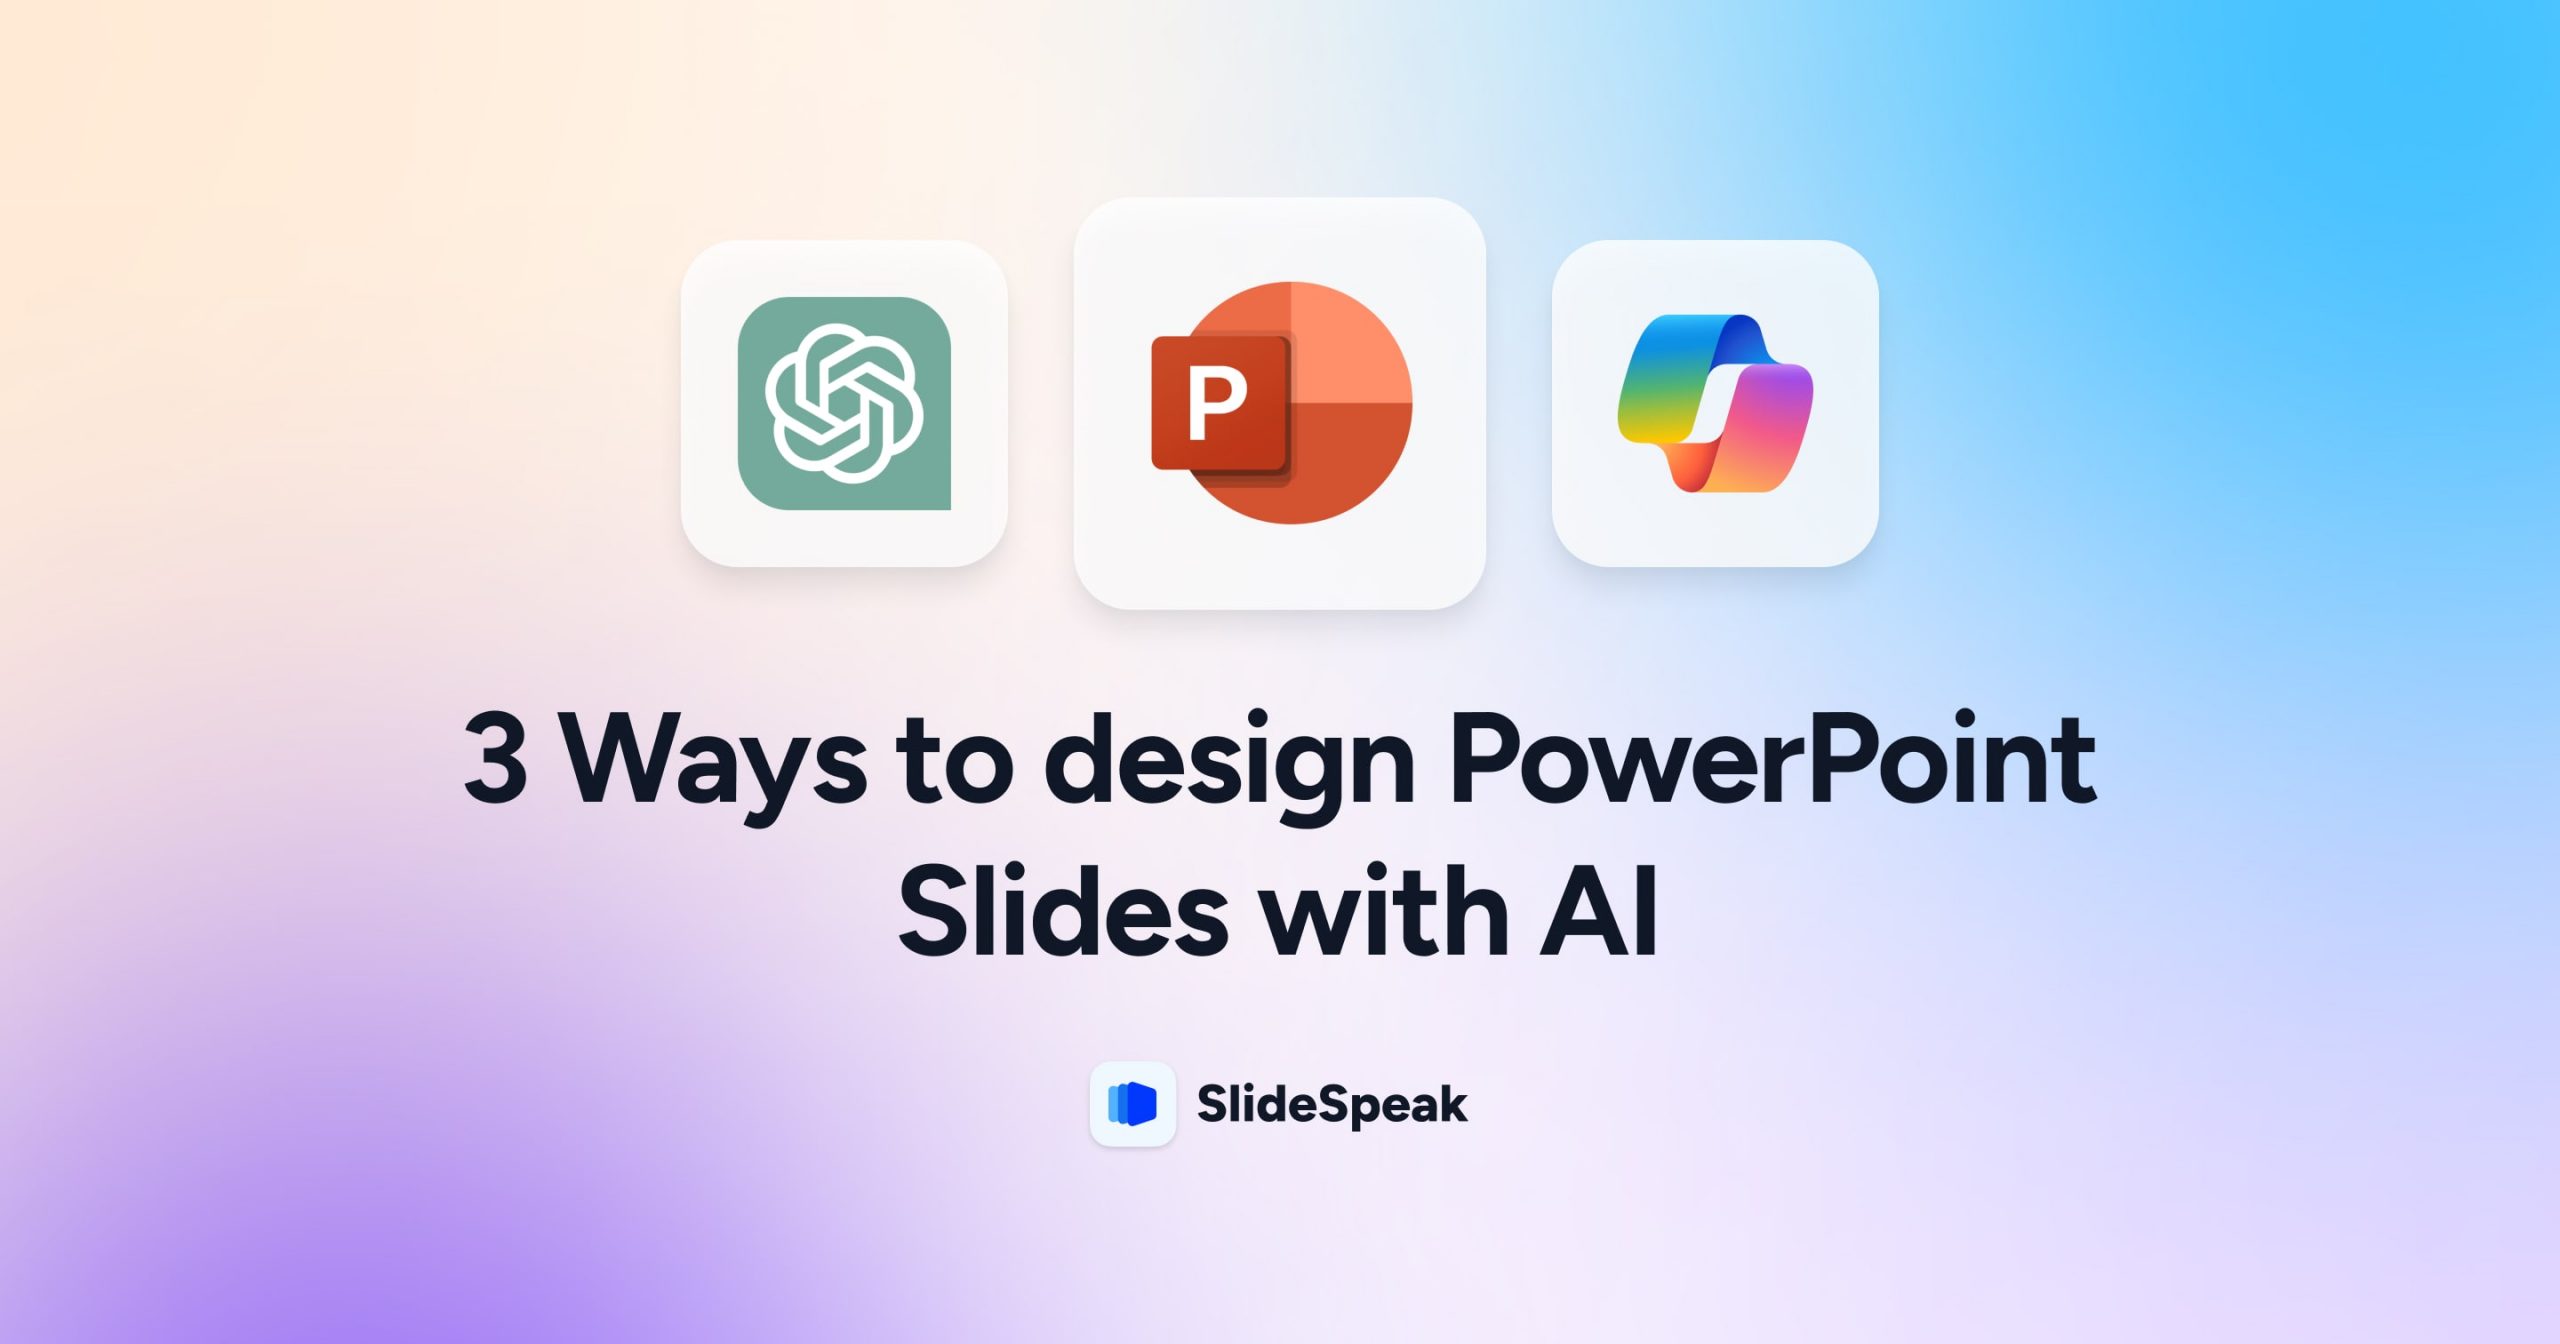 3 Ways to design PowerPoint Slides with AI